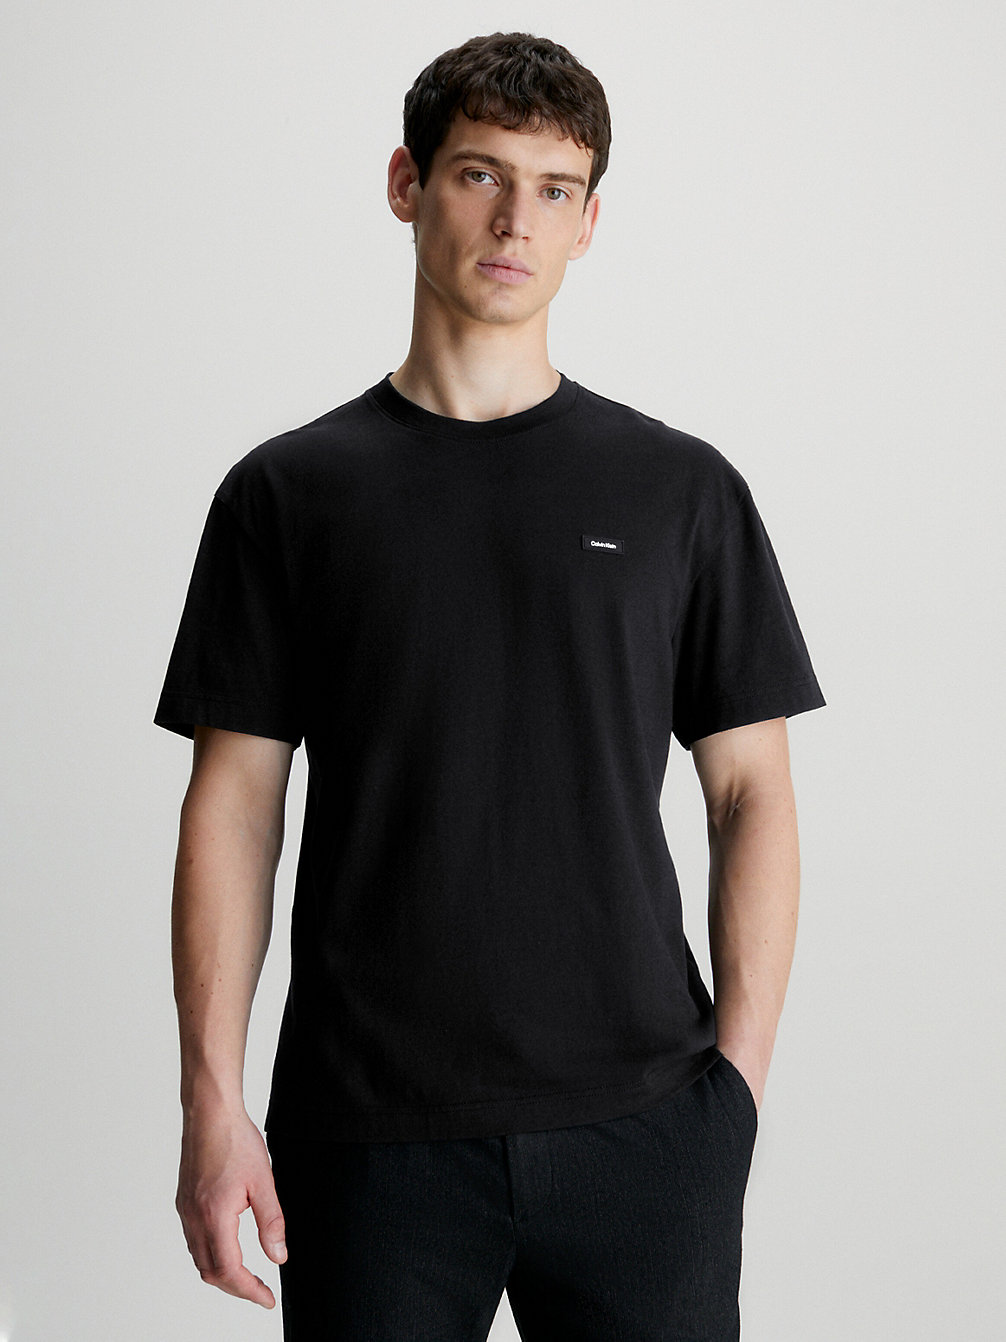 CK BLACK Relaxed Recycled Cotton T-Shirt undefined men Calvin Klein